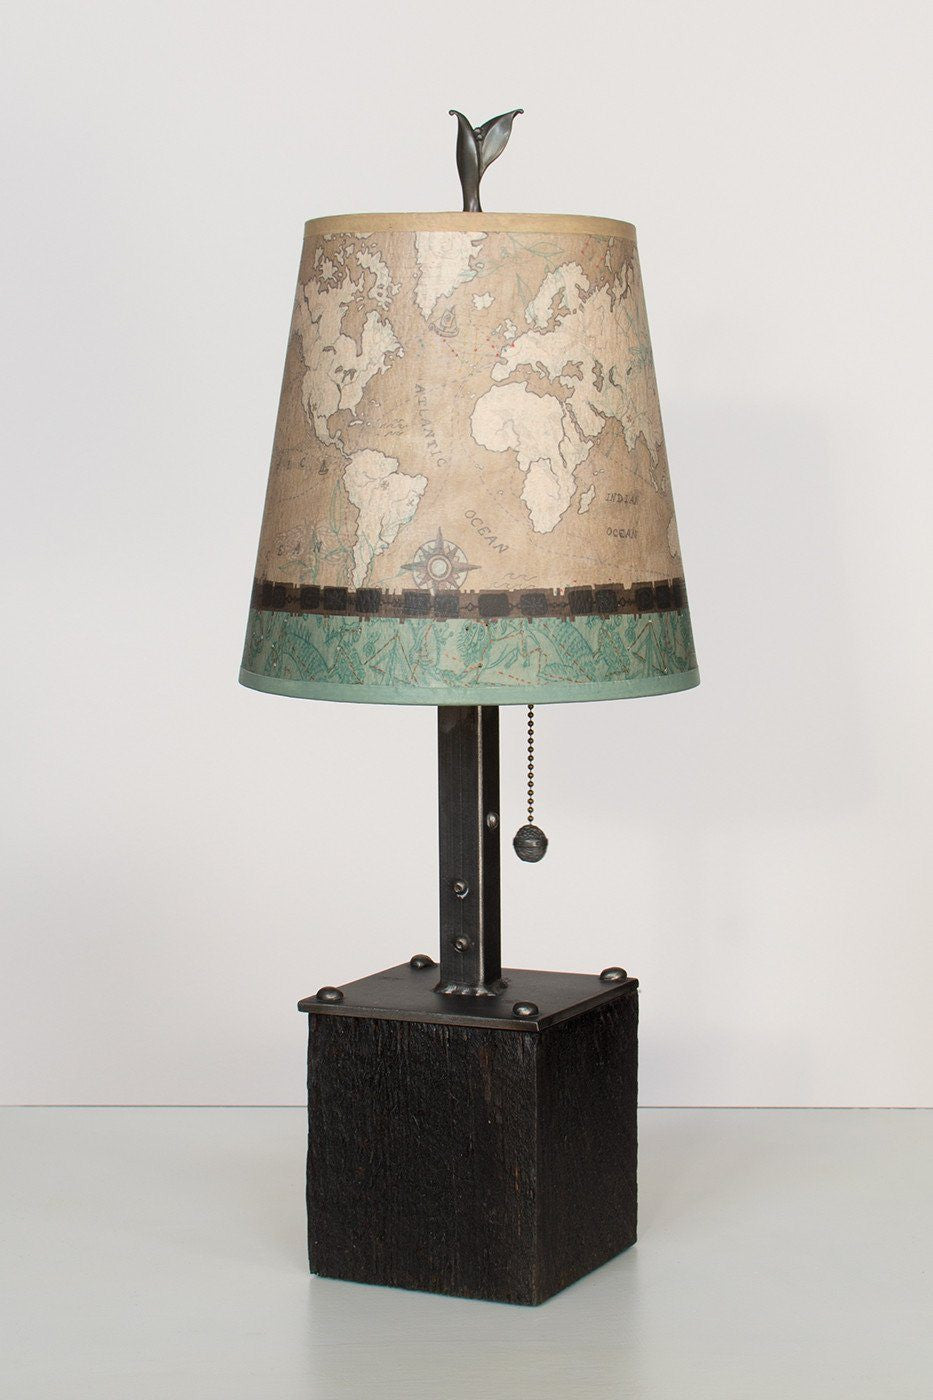 Janna Ugone & Co Table Lamps Steel Table Lamp on Reclaimed Wood with Small Drum Shade in Voyages